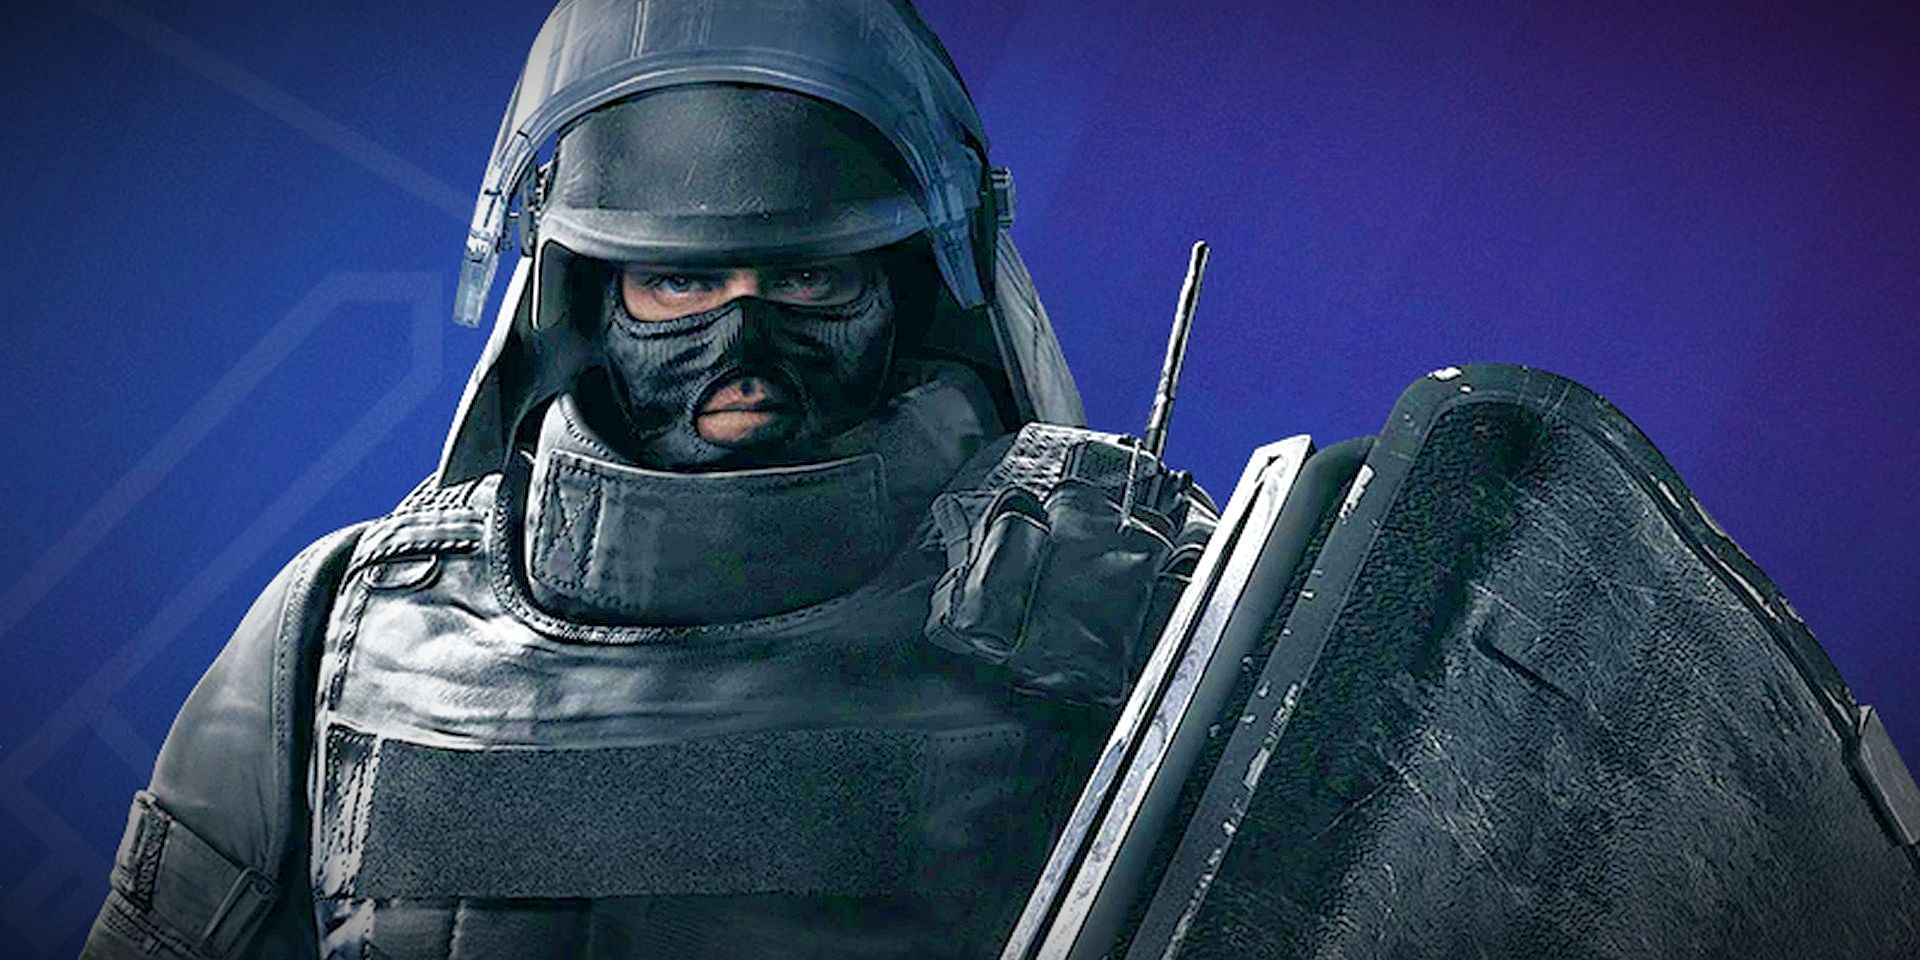 Rainbow Six Siege French operator Montagne wearing heavy armor and holding black collapsible shield